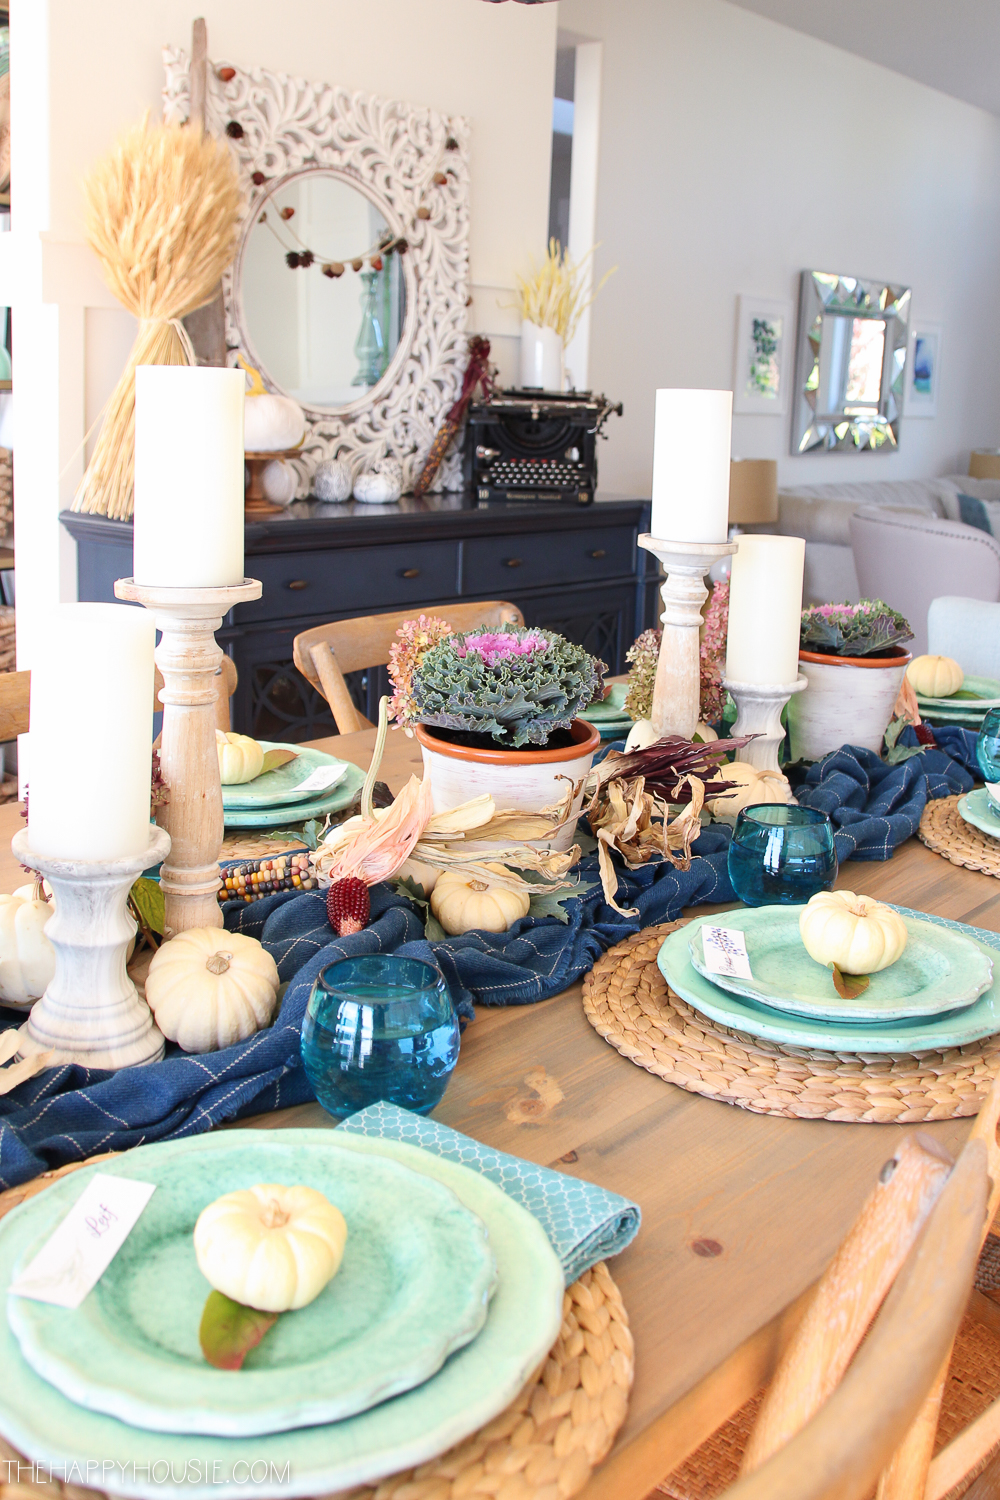 Plaid, candles, blue plates and clear blue glass on the table.